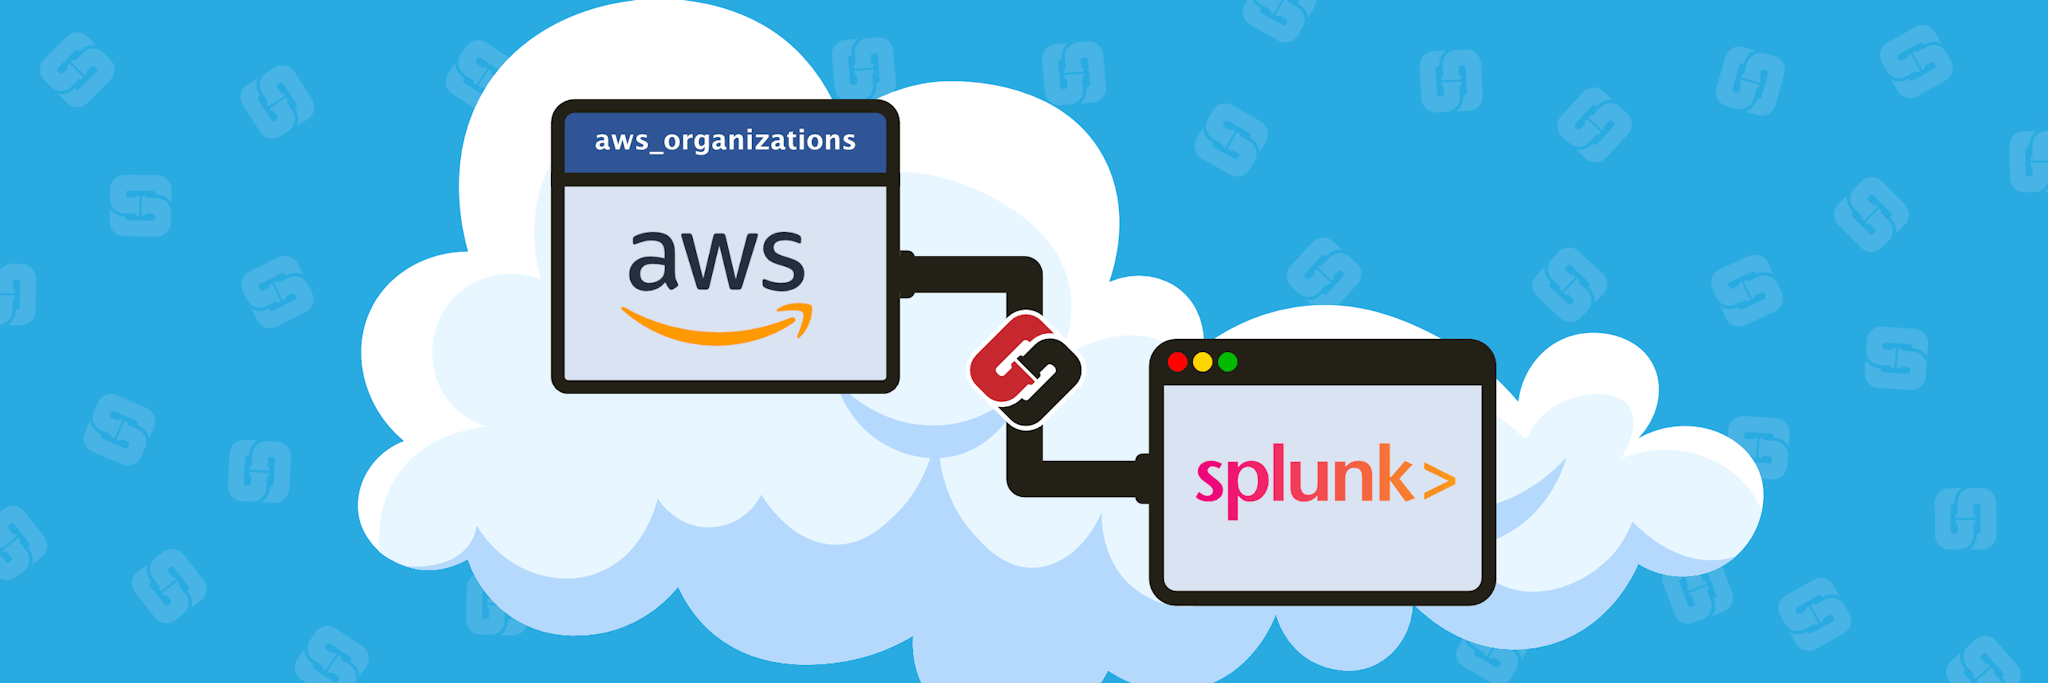 Splunk lookup tables can enrich AWS event data with IP-address/name mappings not available in CloudTrail. Here's how to build those tables with Steampipe.